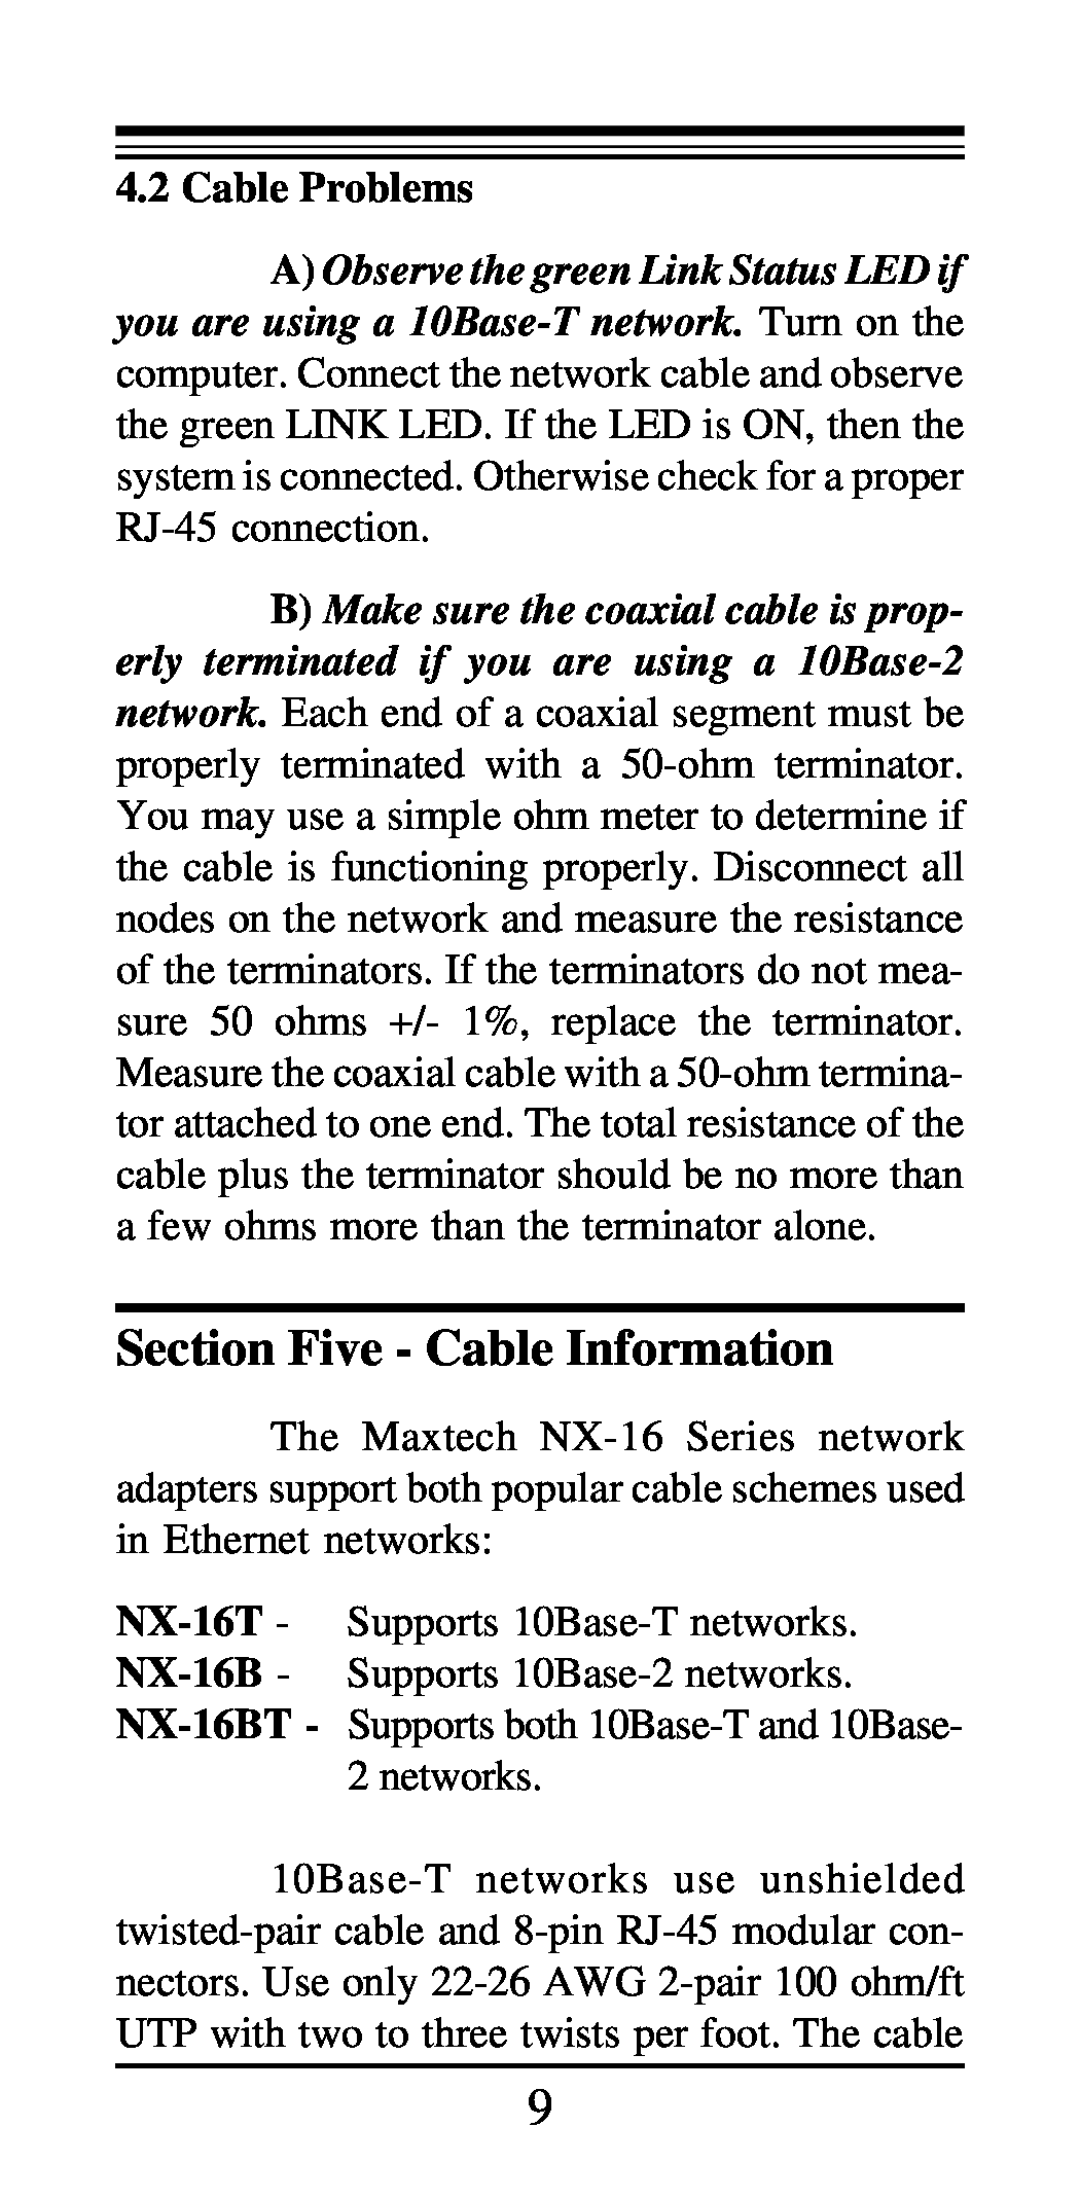 MaxTech NX-16 manual Section Five - Cable Information, Cable Problems 